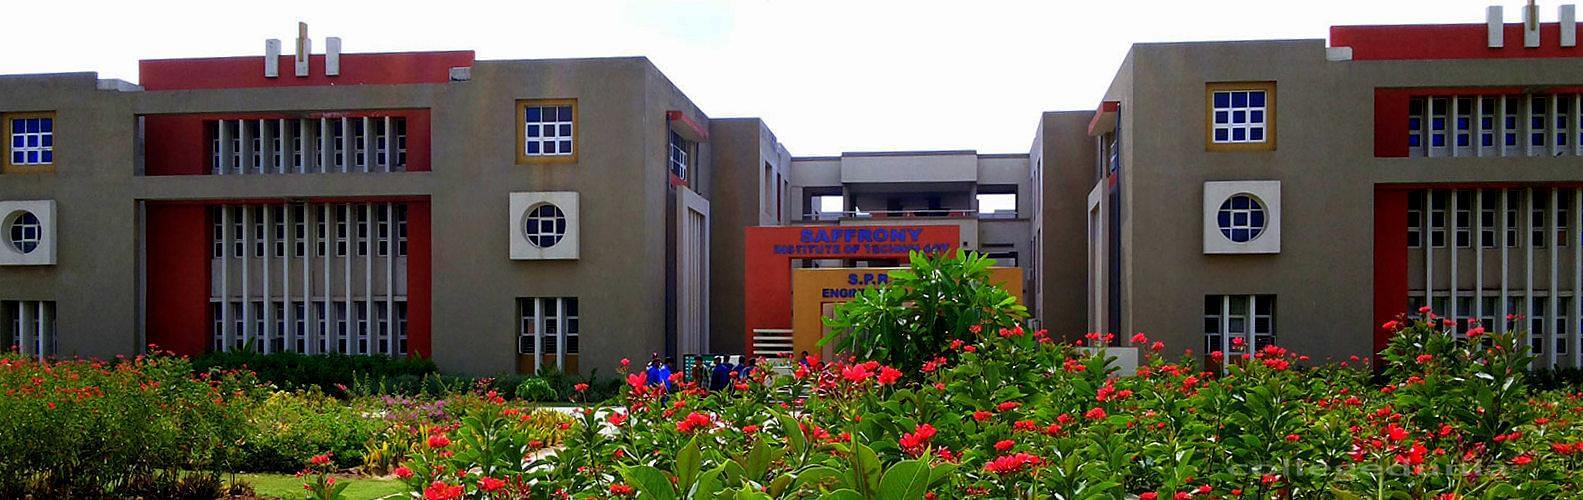 Saffrony Institute of Technology & S.P.B. Patel Engineering College,  Ahmedabad 